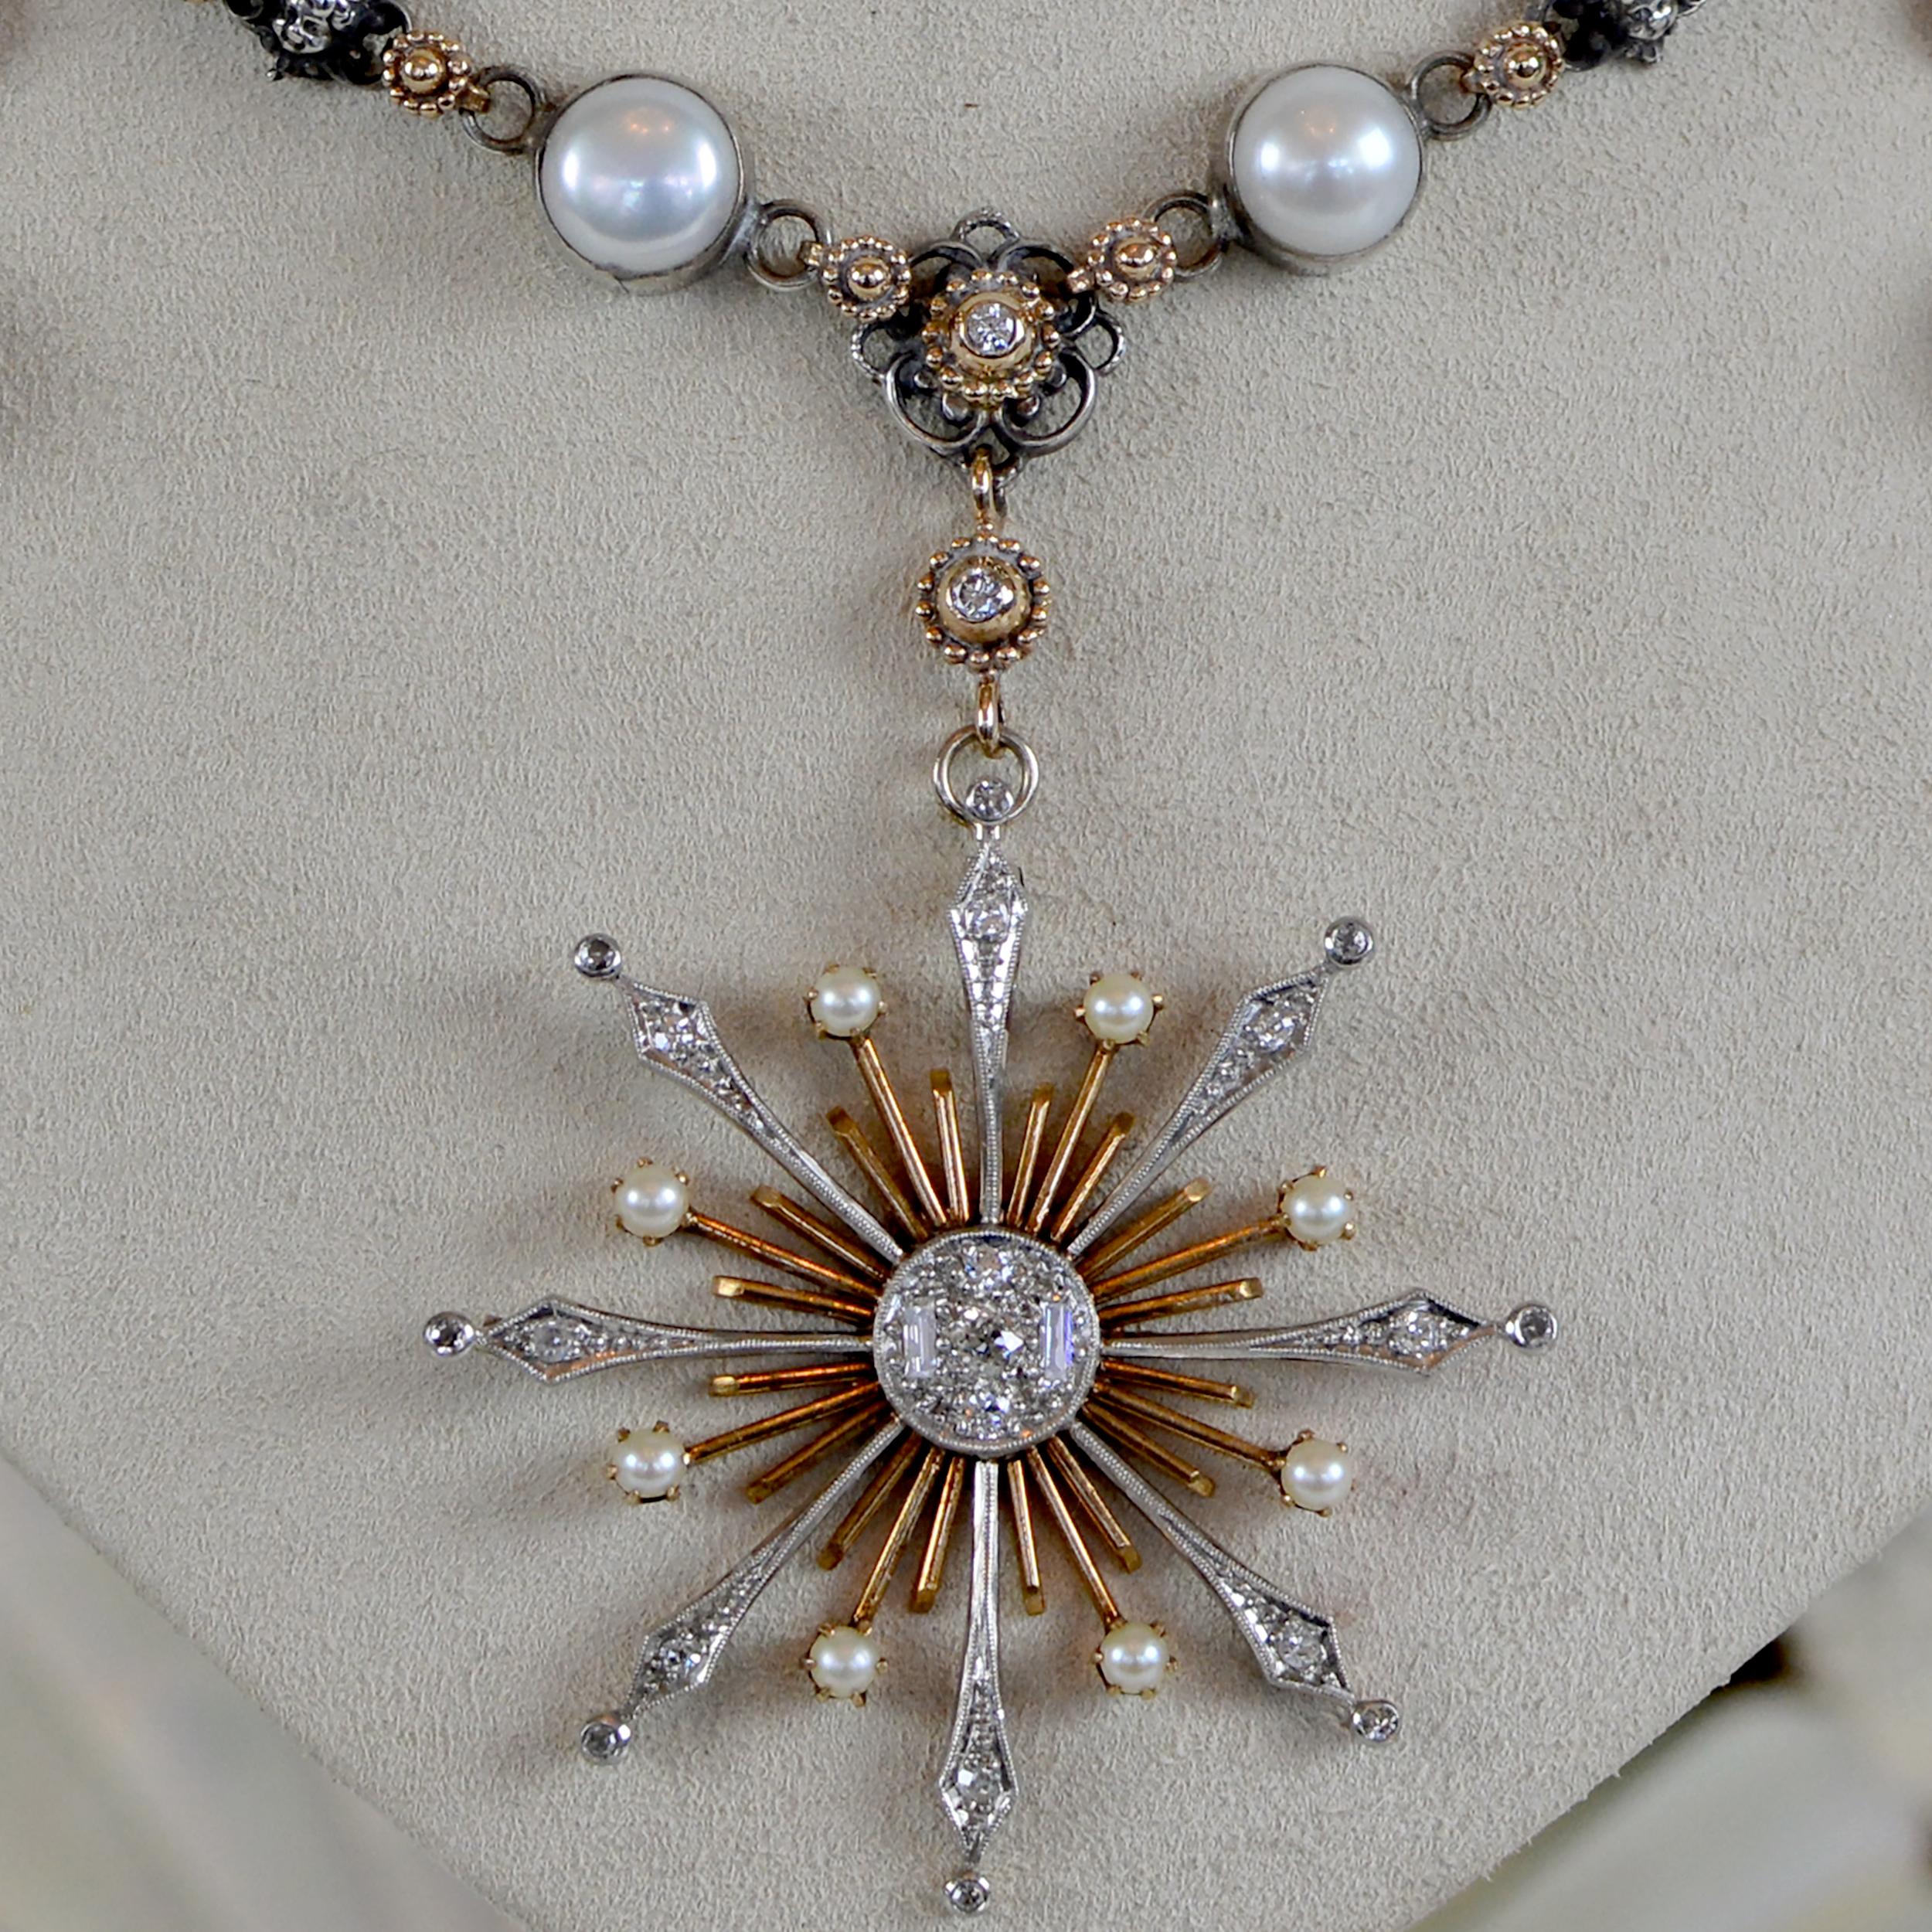 Old European Cut Jill Garber Diamond and Pearl Starburst Drop Necklace - 14 kt. Gold and Silver For Sale